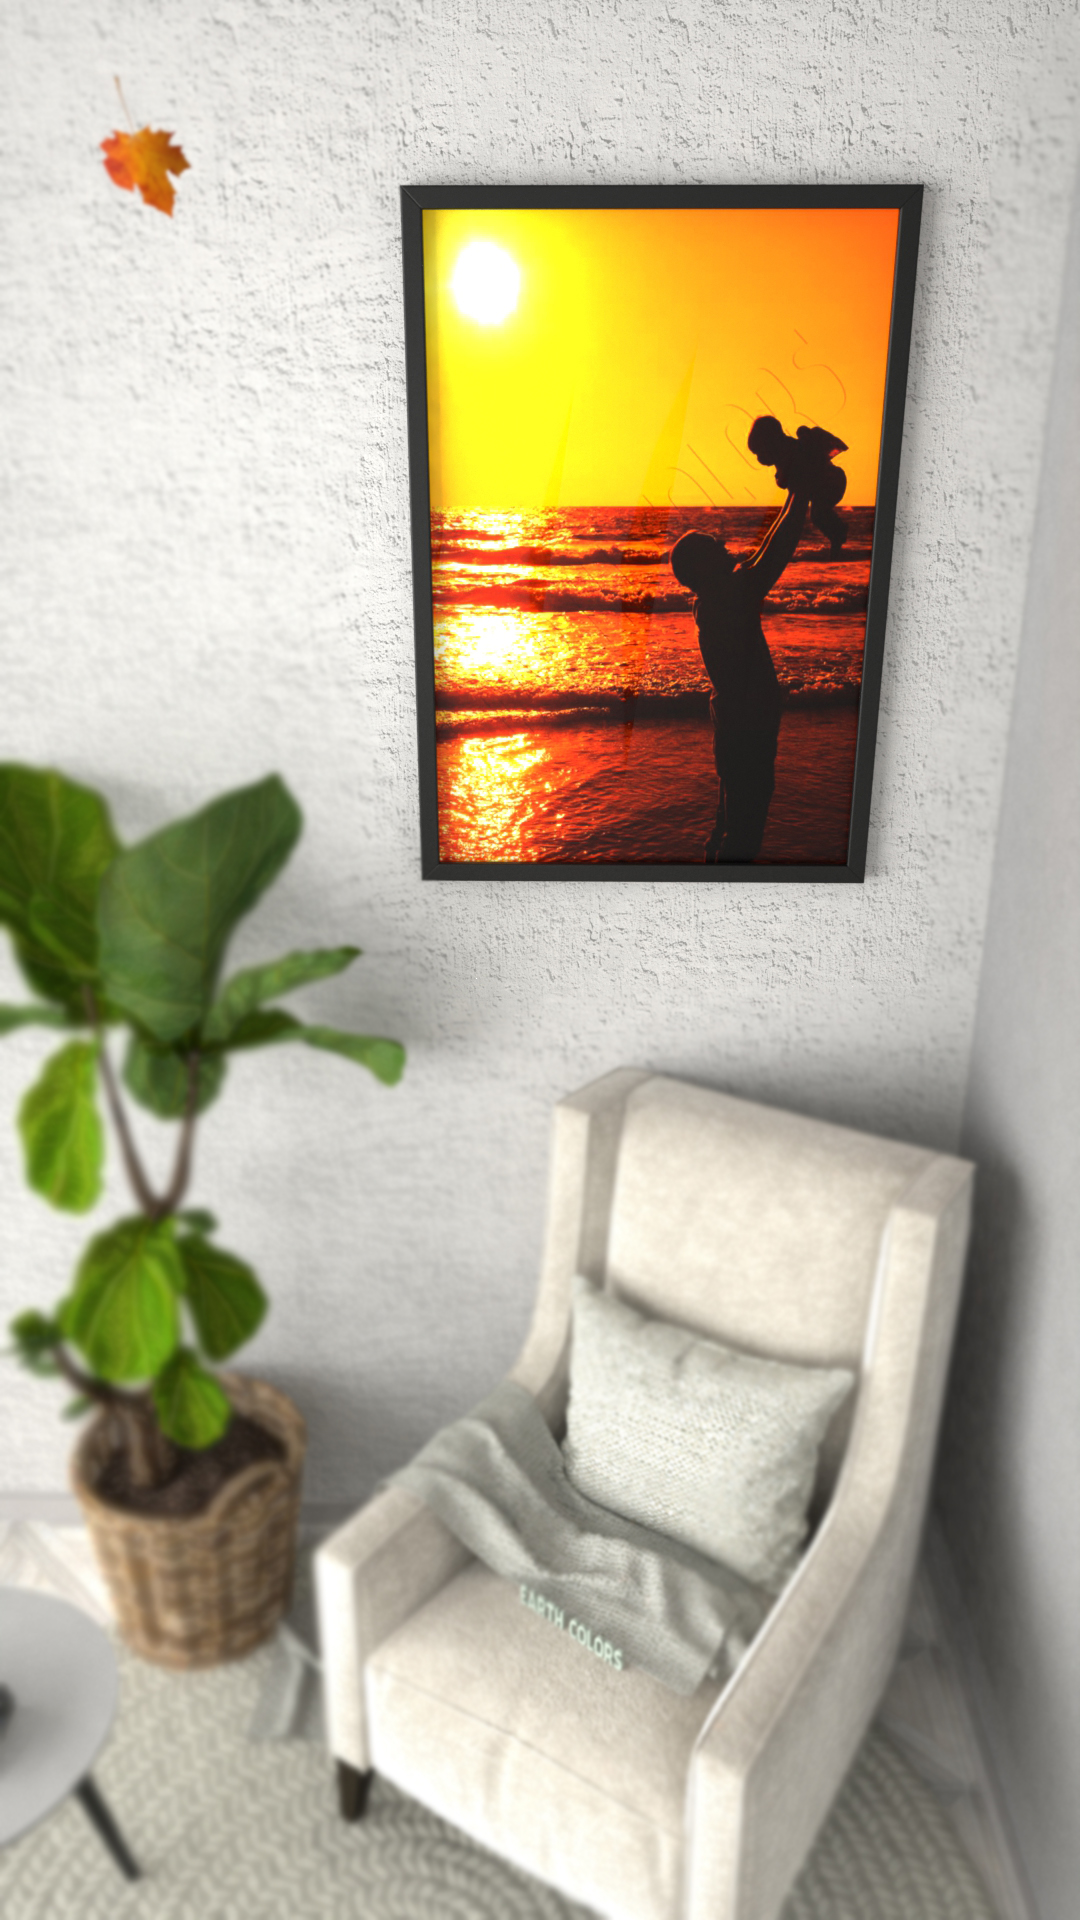 Enjoy traditional earth tone handcraft in multi-photo framing